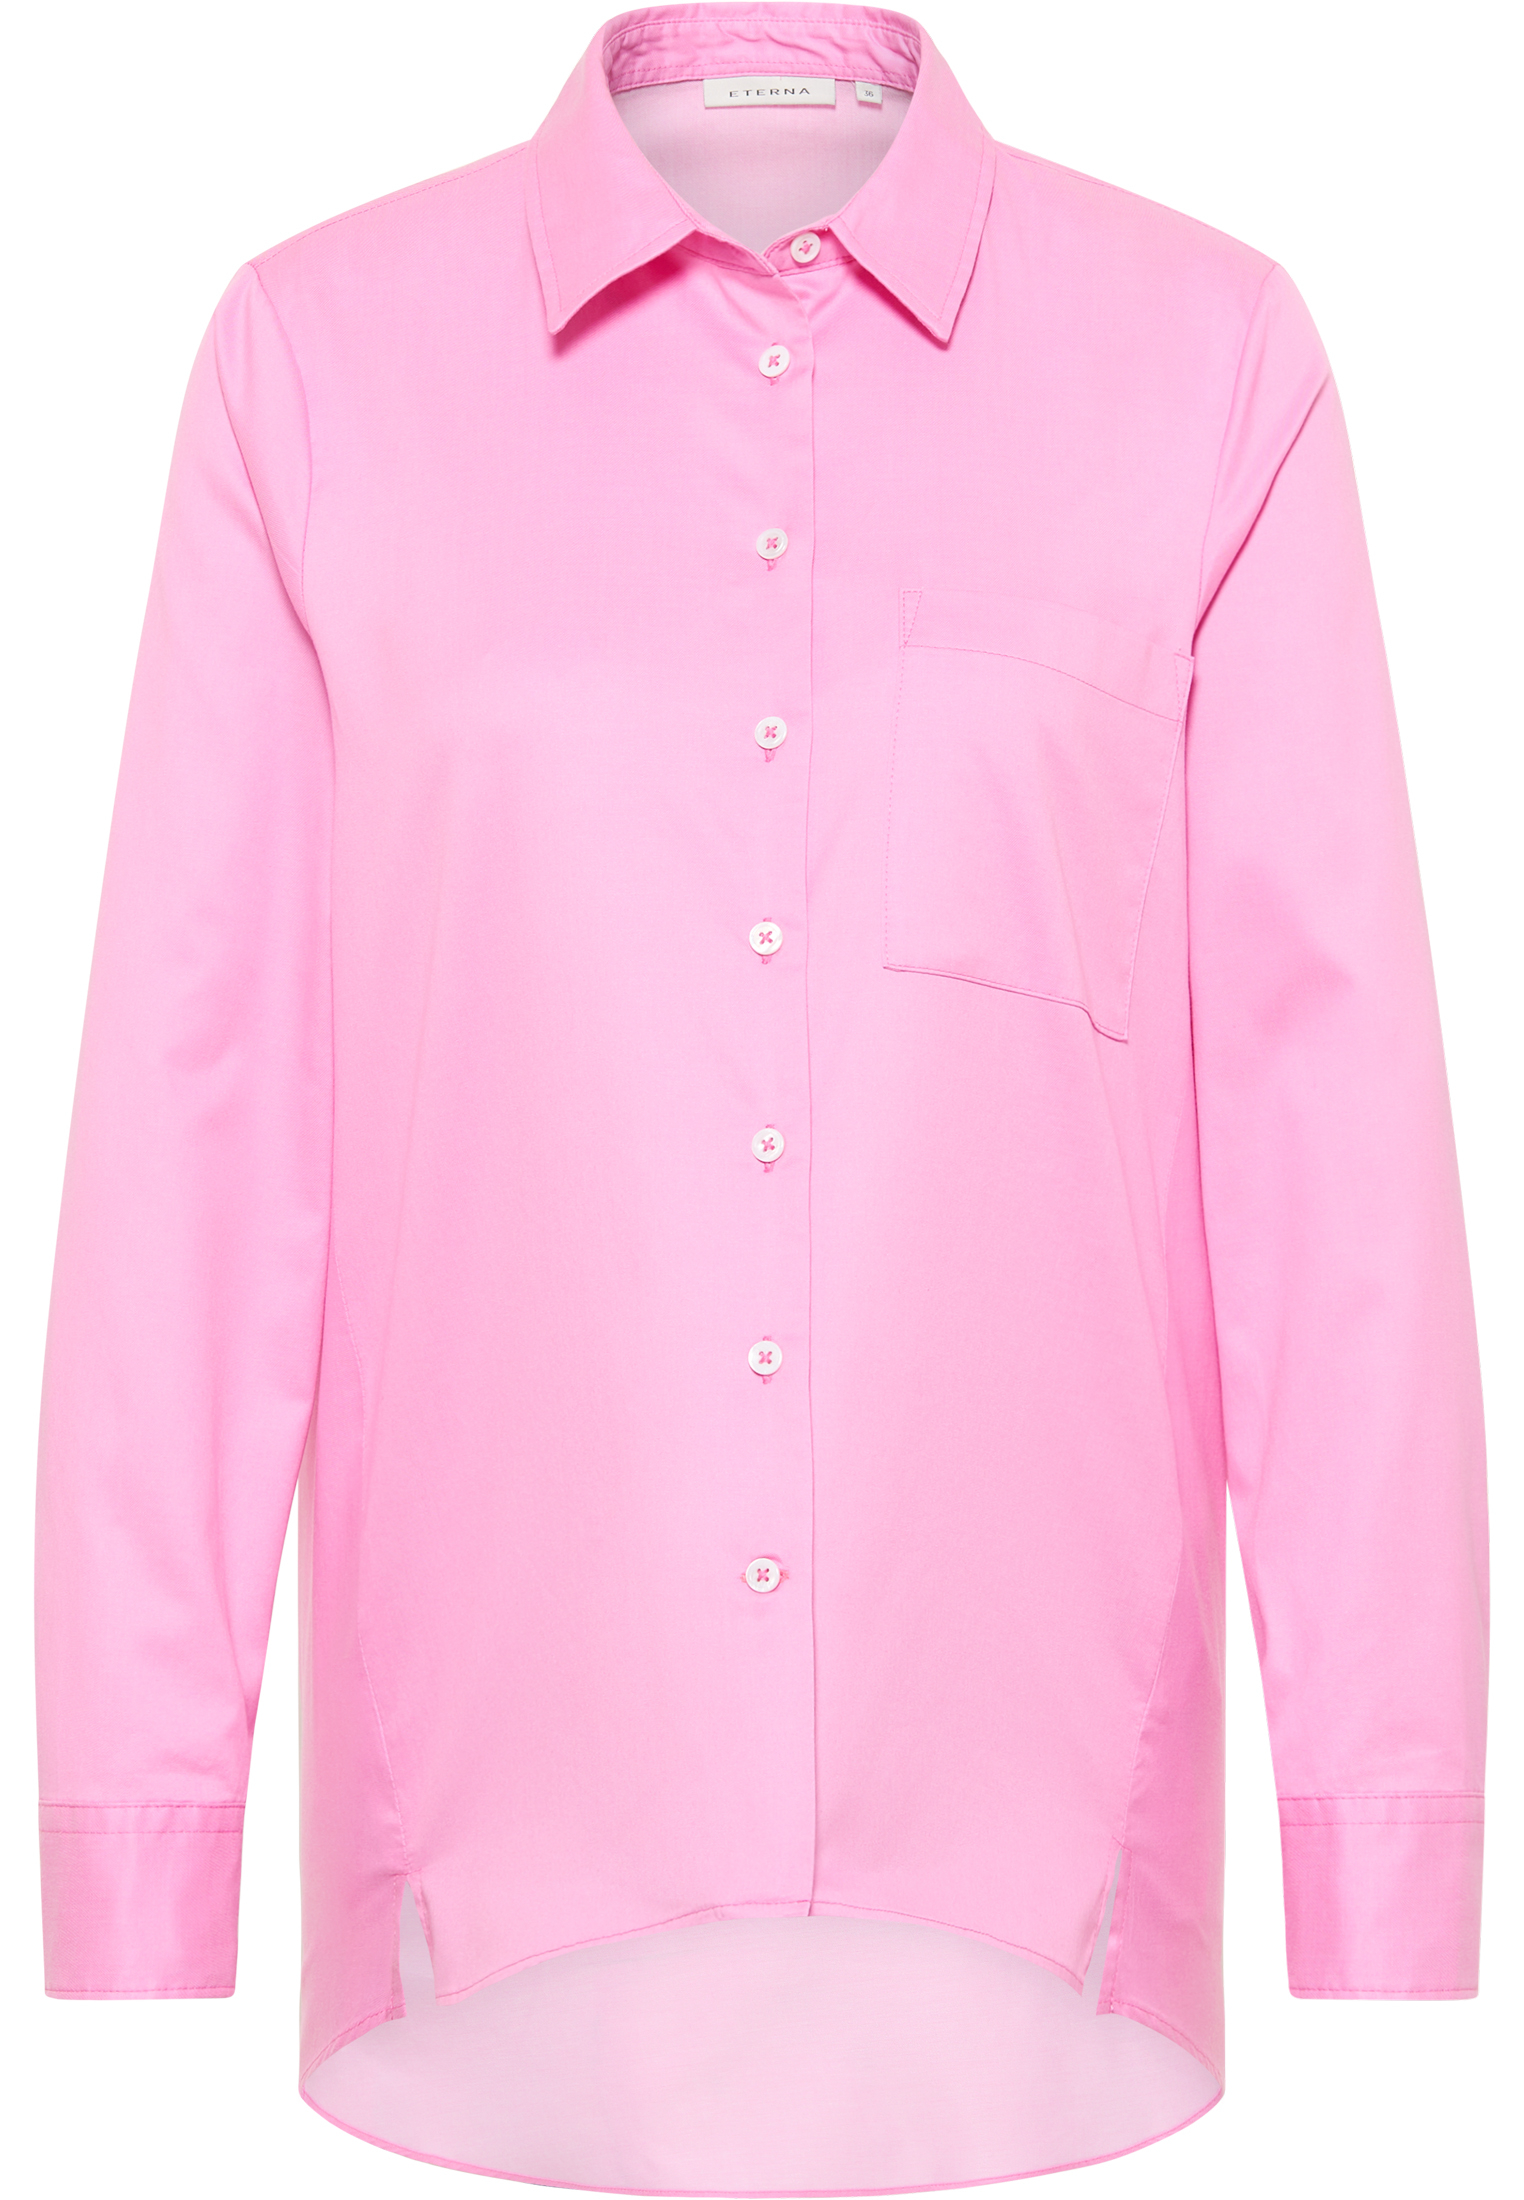 | | long | Soft in sleeve pink 44 Luxury Shirt | pink 2BL03851-15-21-44-1/1 plain Blouse